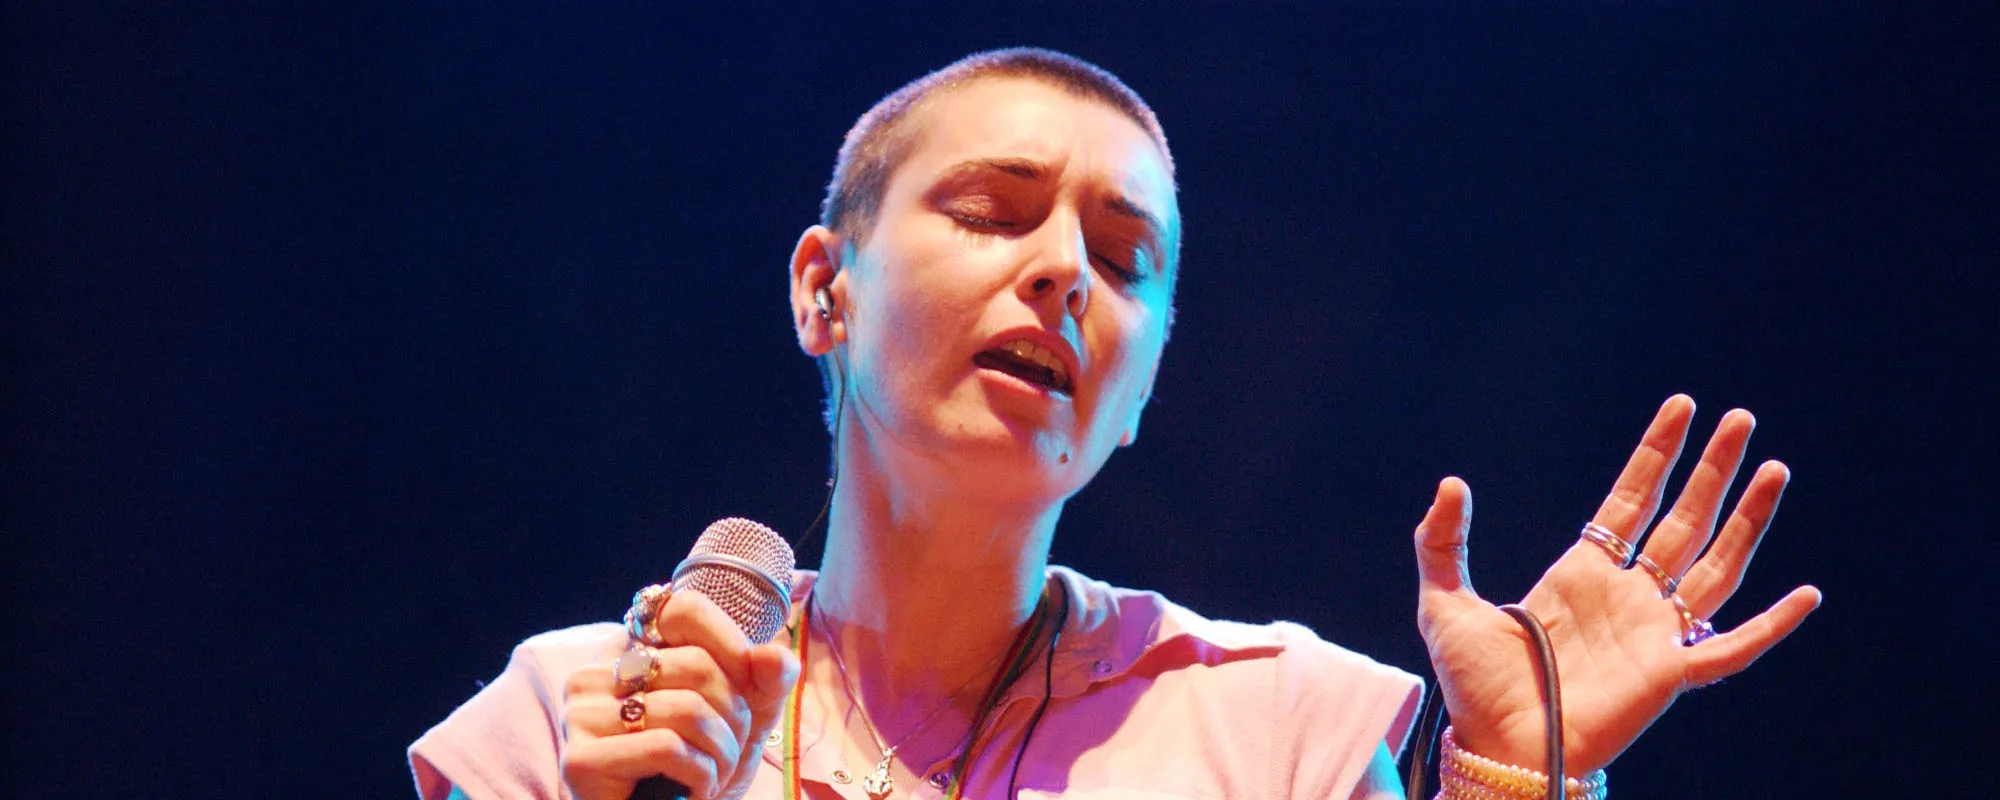 The Meaning Behind “The Emperor’s New Clothes” by Sinéad O’Connor and the Rock Band It Takes a Shot at